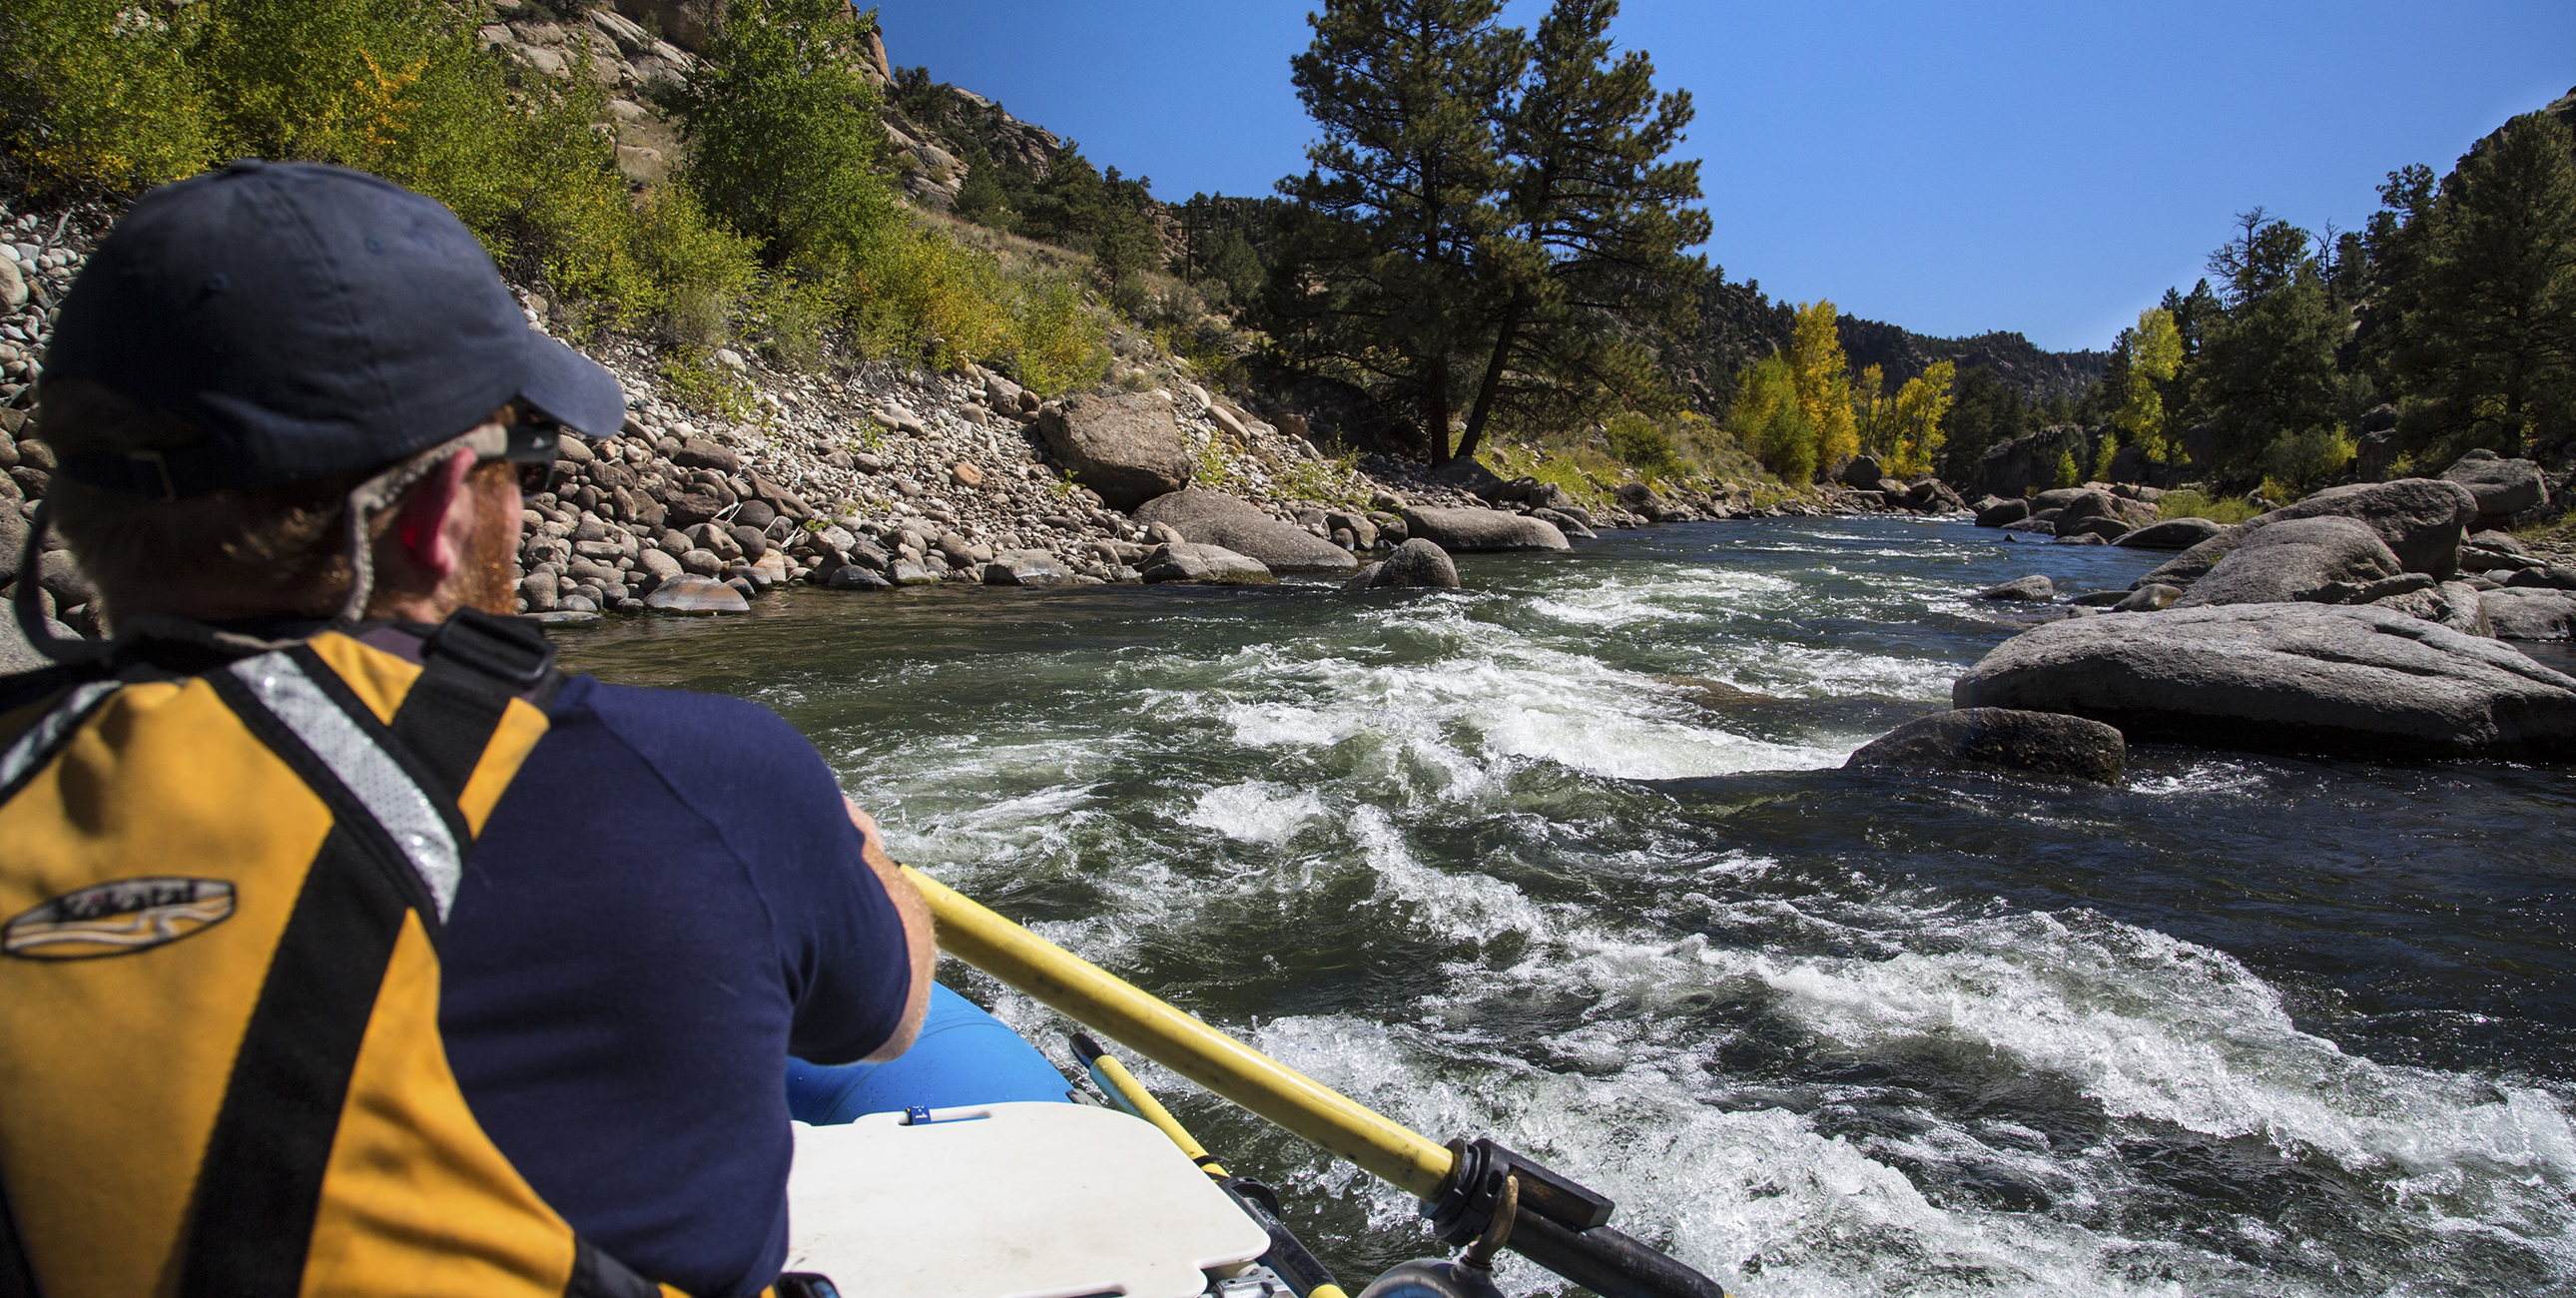 A kayaker navigates strong currents and large boulders while traveling down a narrow river surrounded by forests and clear blue sky.